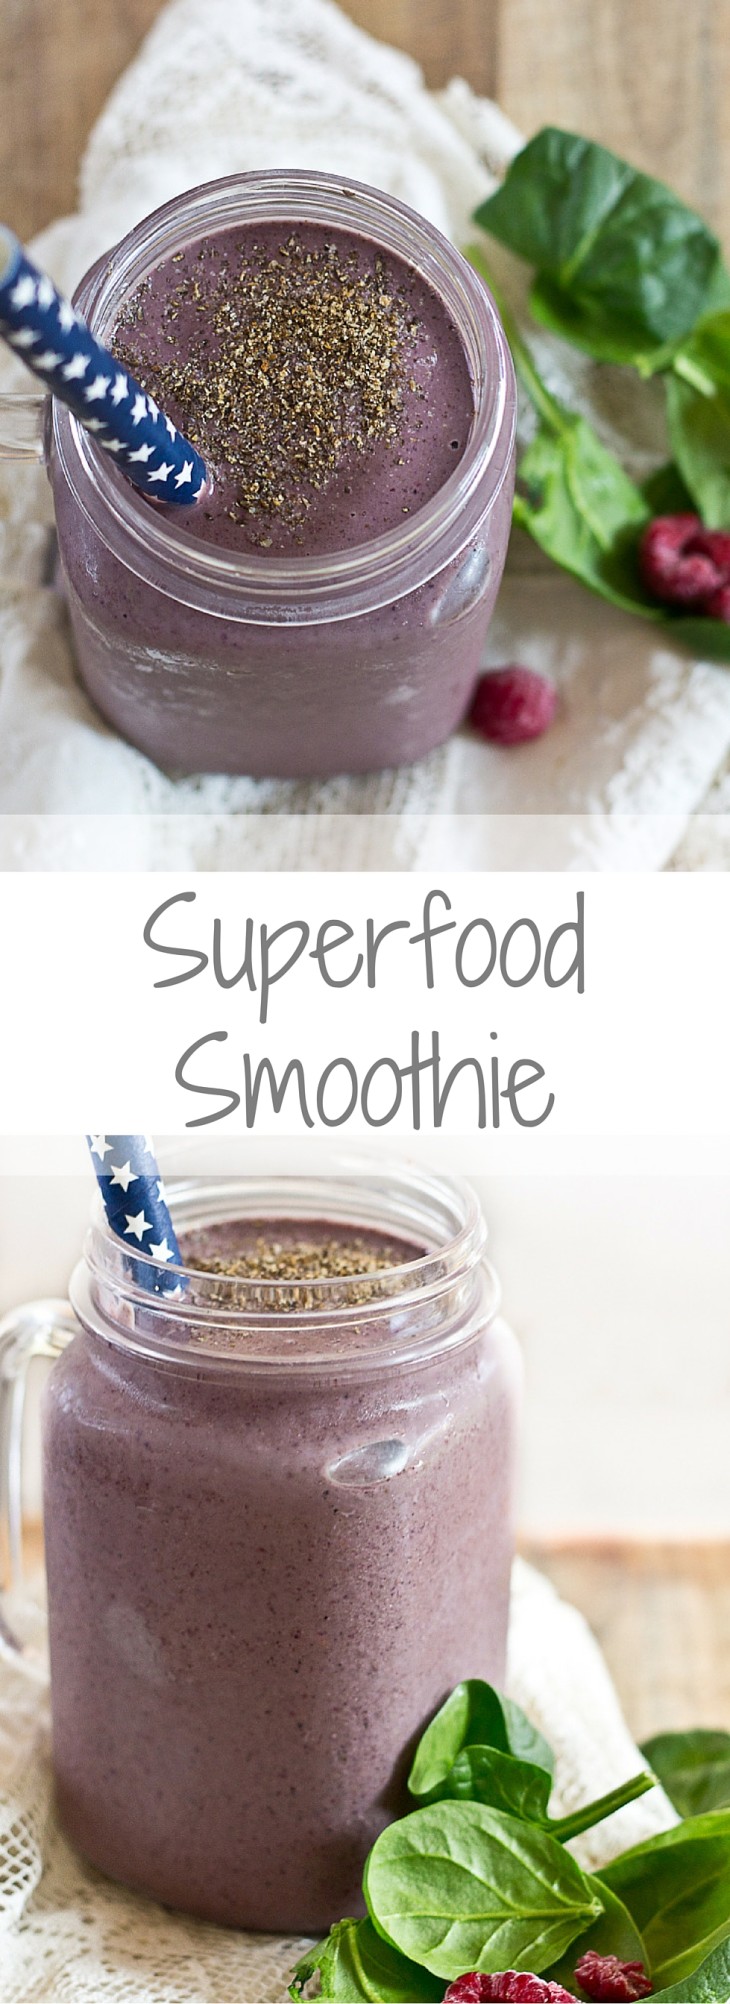 Get this Superfood Smoothie crammed packed with good for you stuff like chia seeds, ground flax, loads of berries, almond butter, and spinach. I love the purple color of this green smoothie! You'd never know there were greens hidden in there!